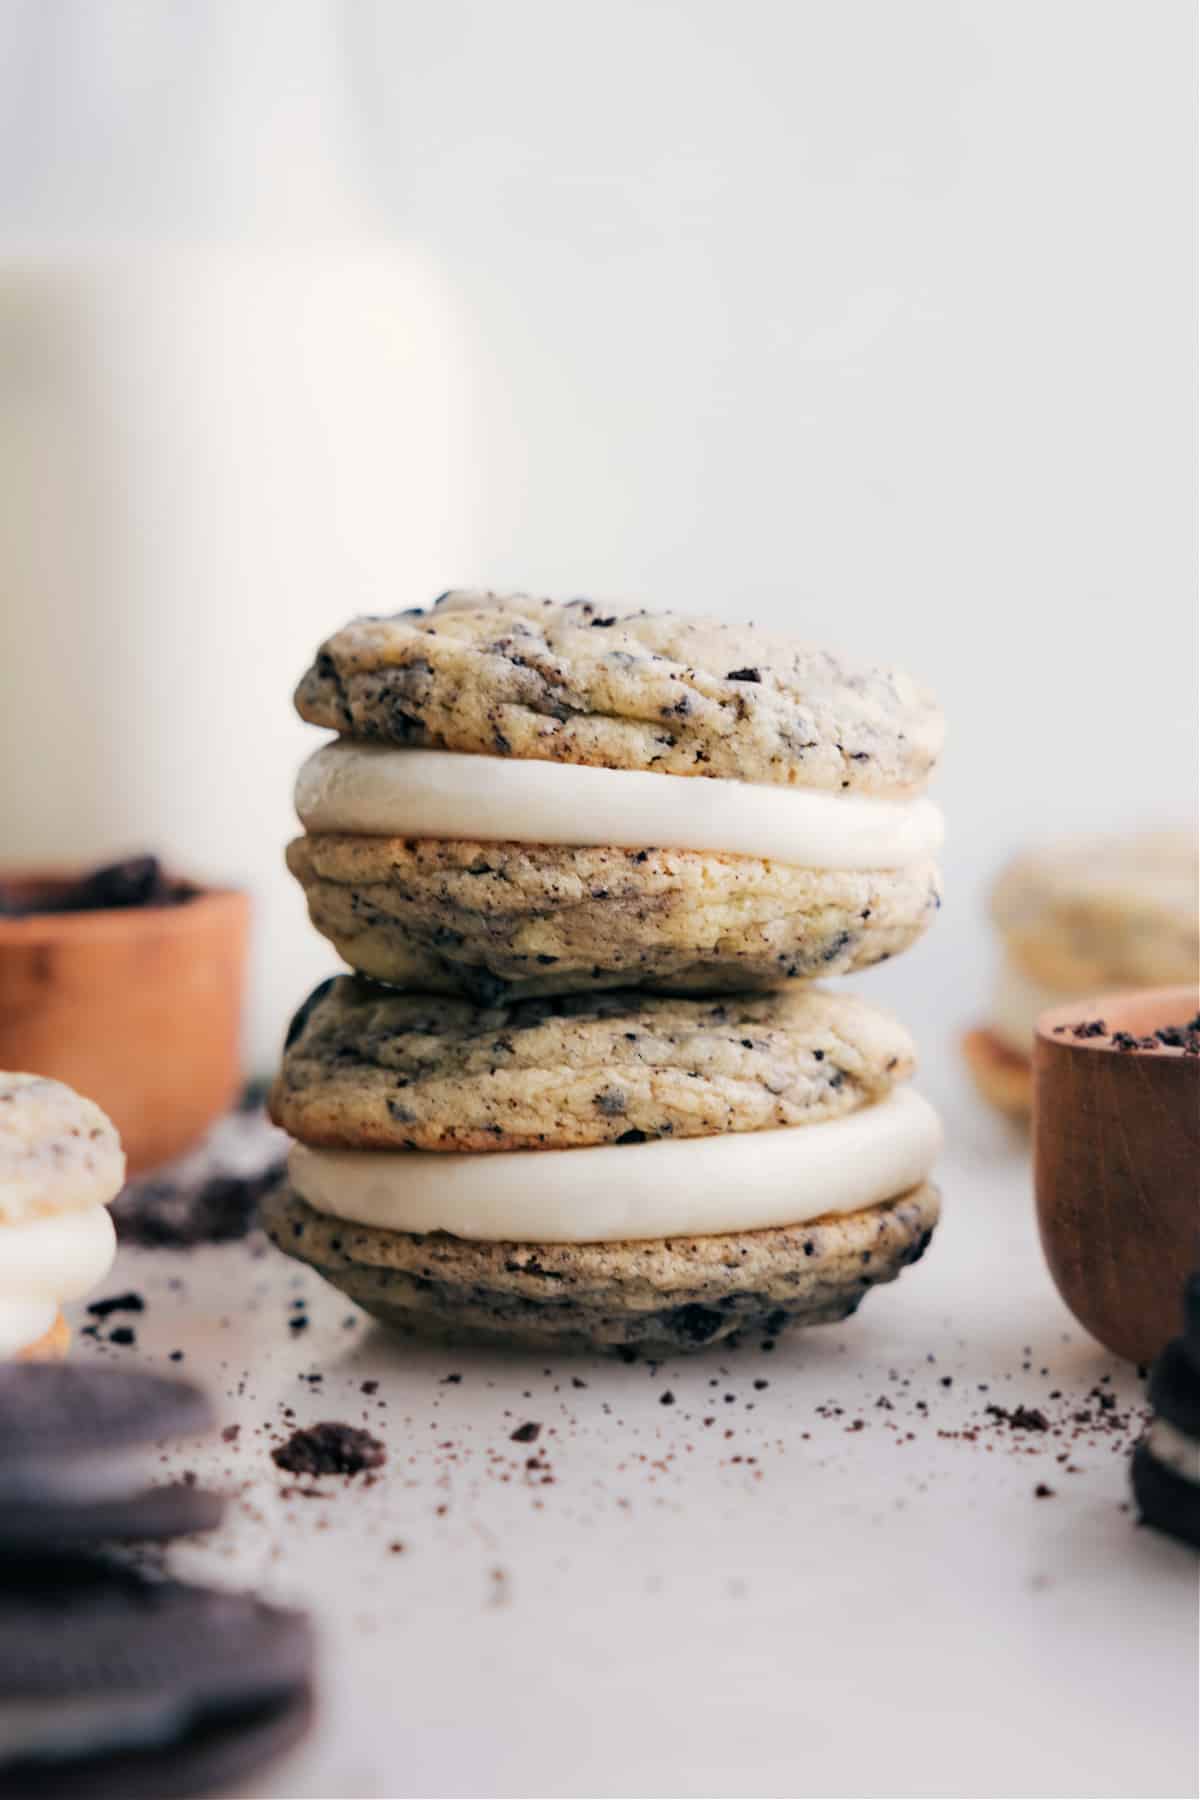 Oreo Whoopie Pies stacked on top of each other.